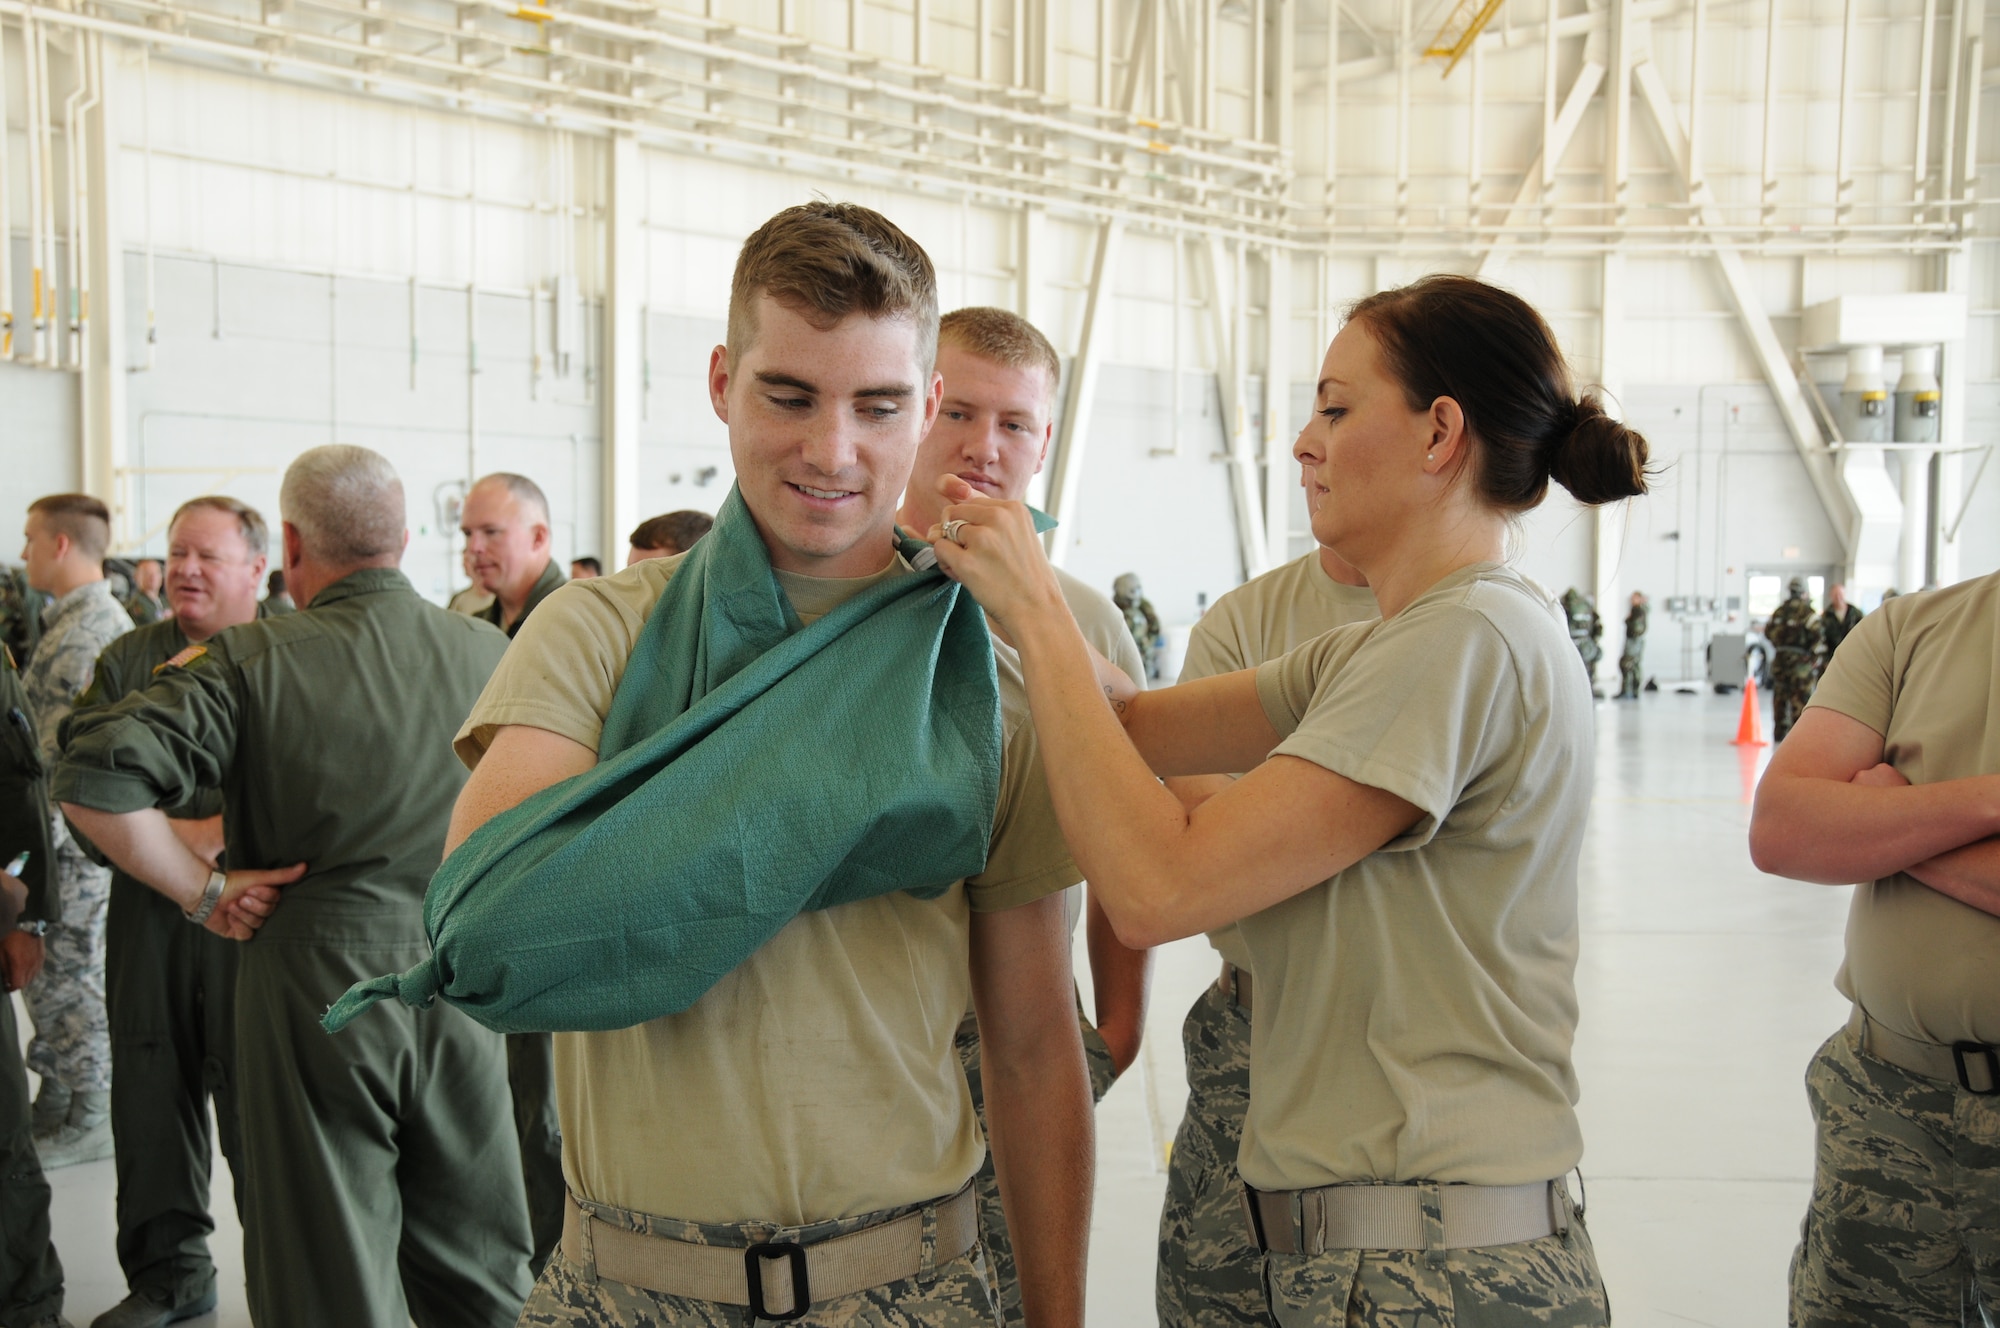 U.S. Air Force Tech. Sgt. Shanna Bufkin, 186th Air Refueling Wing Medical Group member, demonstrates how to tie a sling on Airman 1st Class Kyle Koch during the Expeditionary Skills Refresher Course at the Combat Readiness Training Center, Gulfport, Miss., July 14, 2015. The  refresher course included both Self-Aid Buddy Care and Chemical, Biological, Radiological, Nuclear and Explosives survival. (U.S. Air National Guard photo by Senior Airman Jessica Fielder/Released)